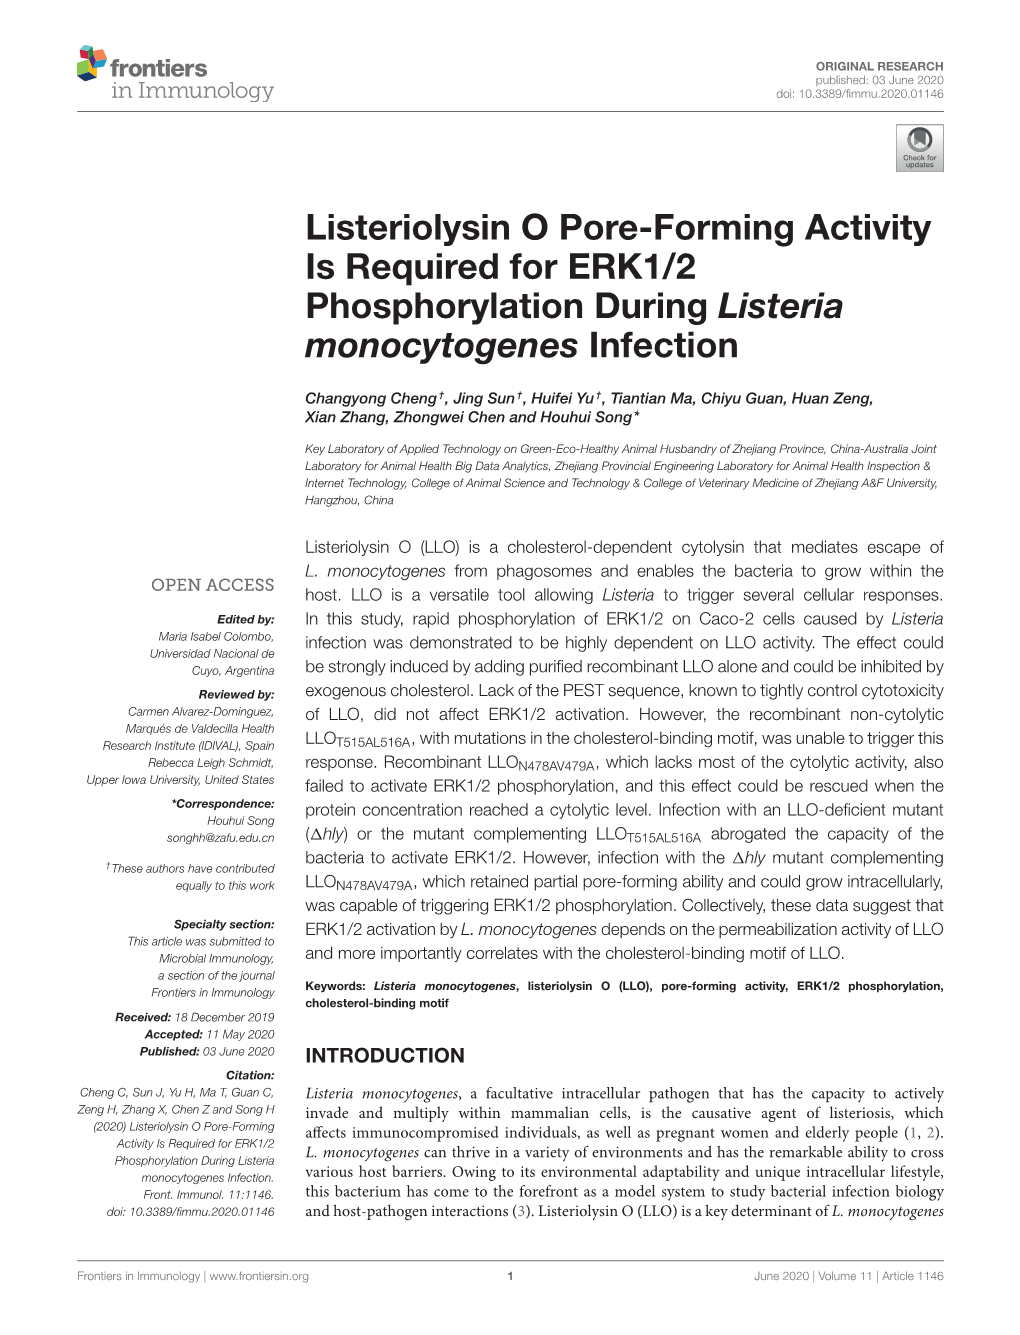 Listeriolysin O Pore-Forming Activity Is Required for ERK1/2 Phosphorylation During Listeria Monocytogenes Infection